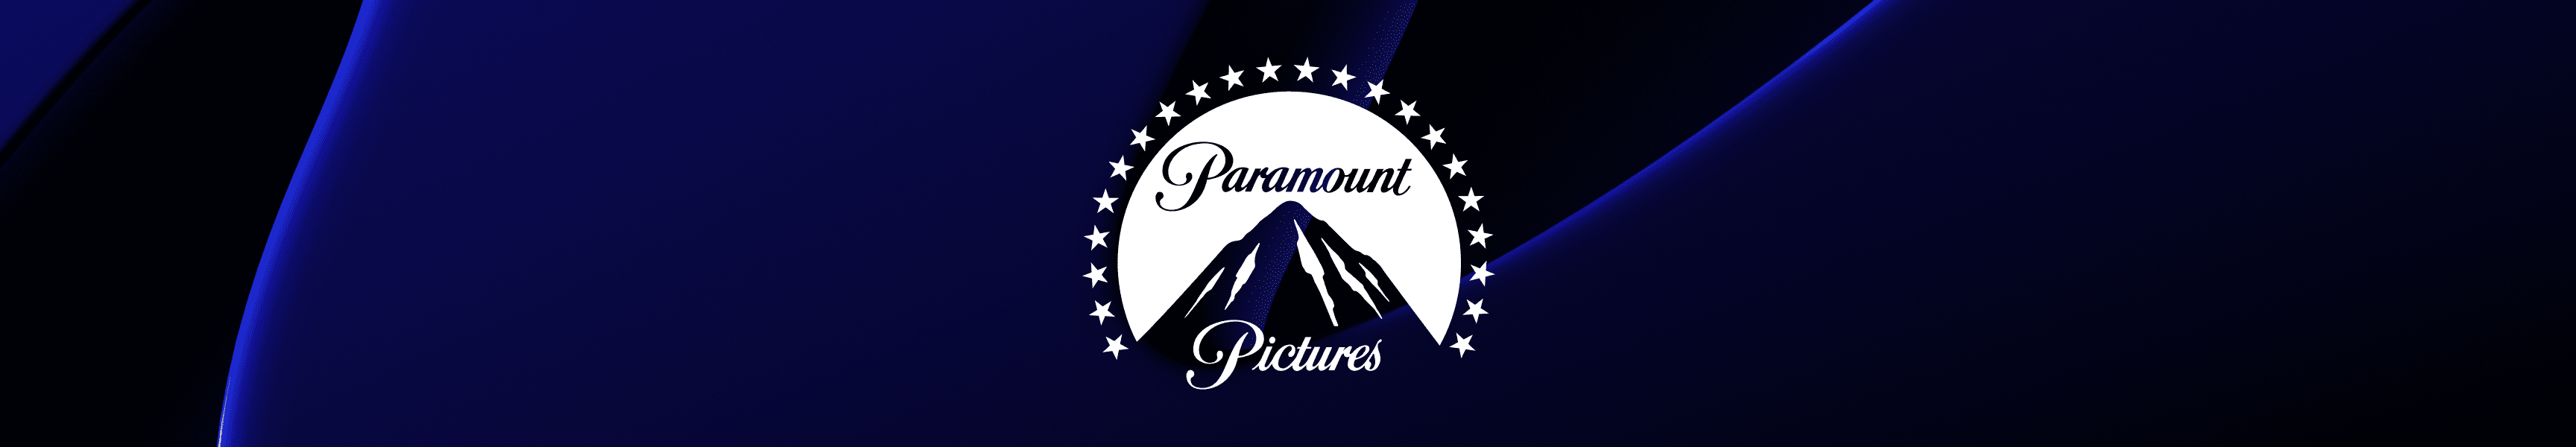 Paramount Pictures Bags & Backpacks